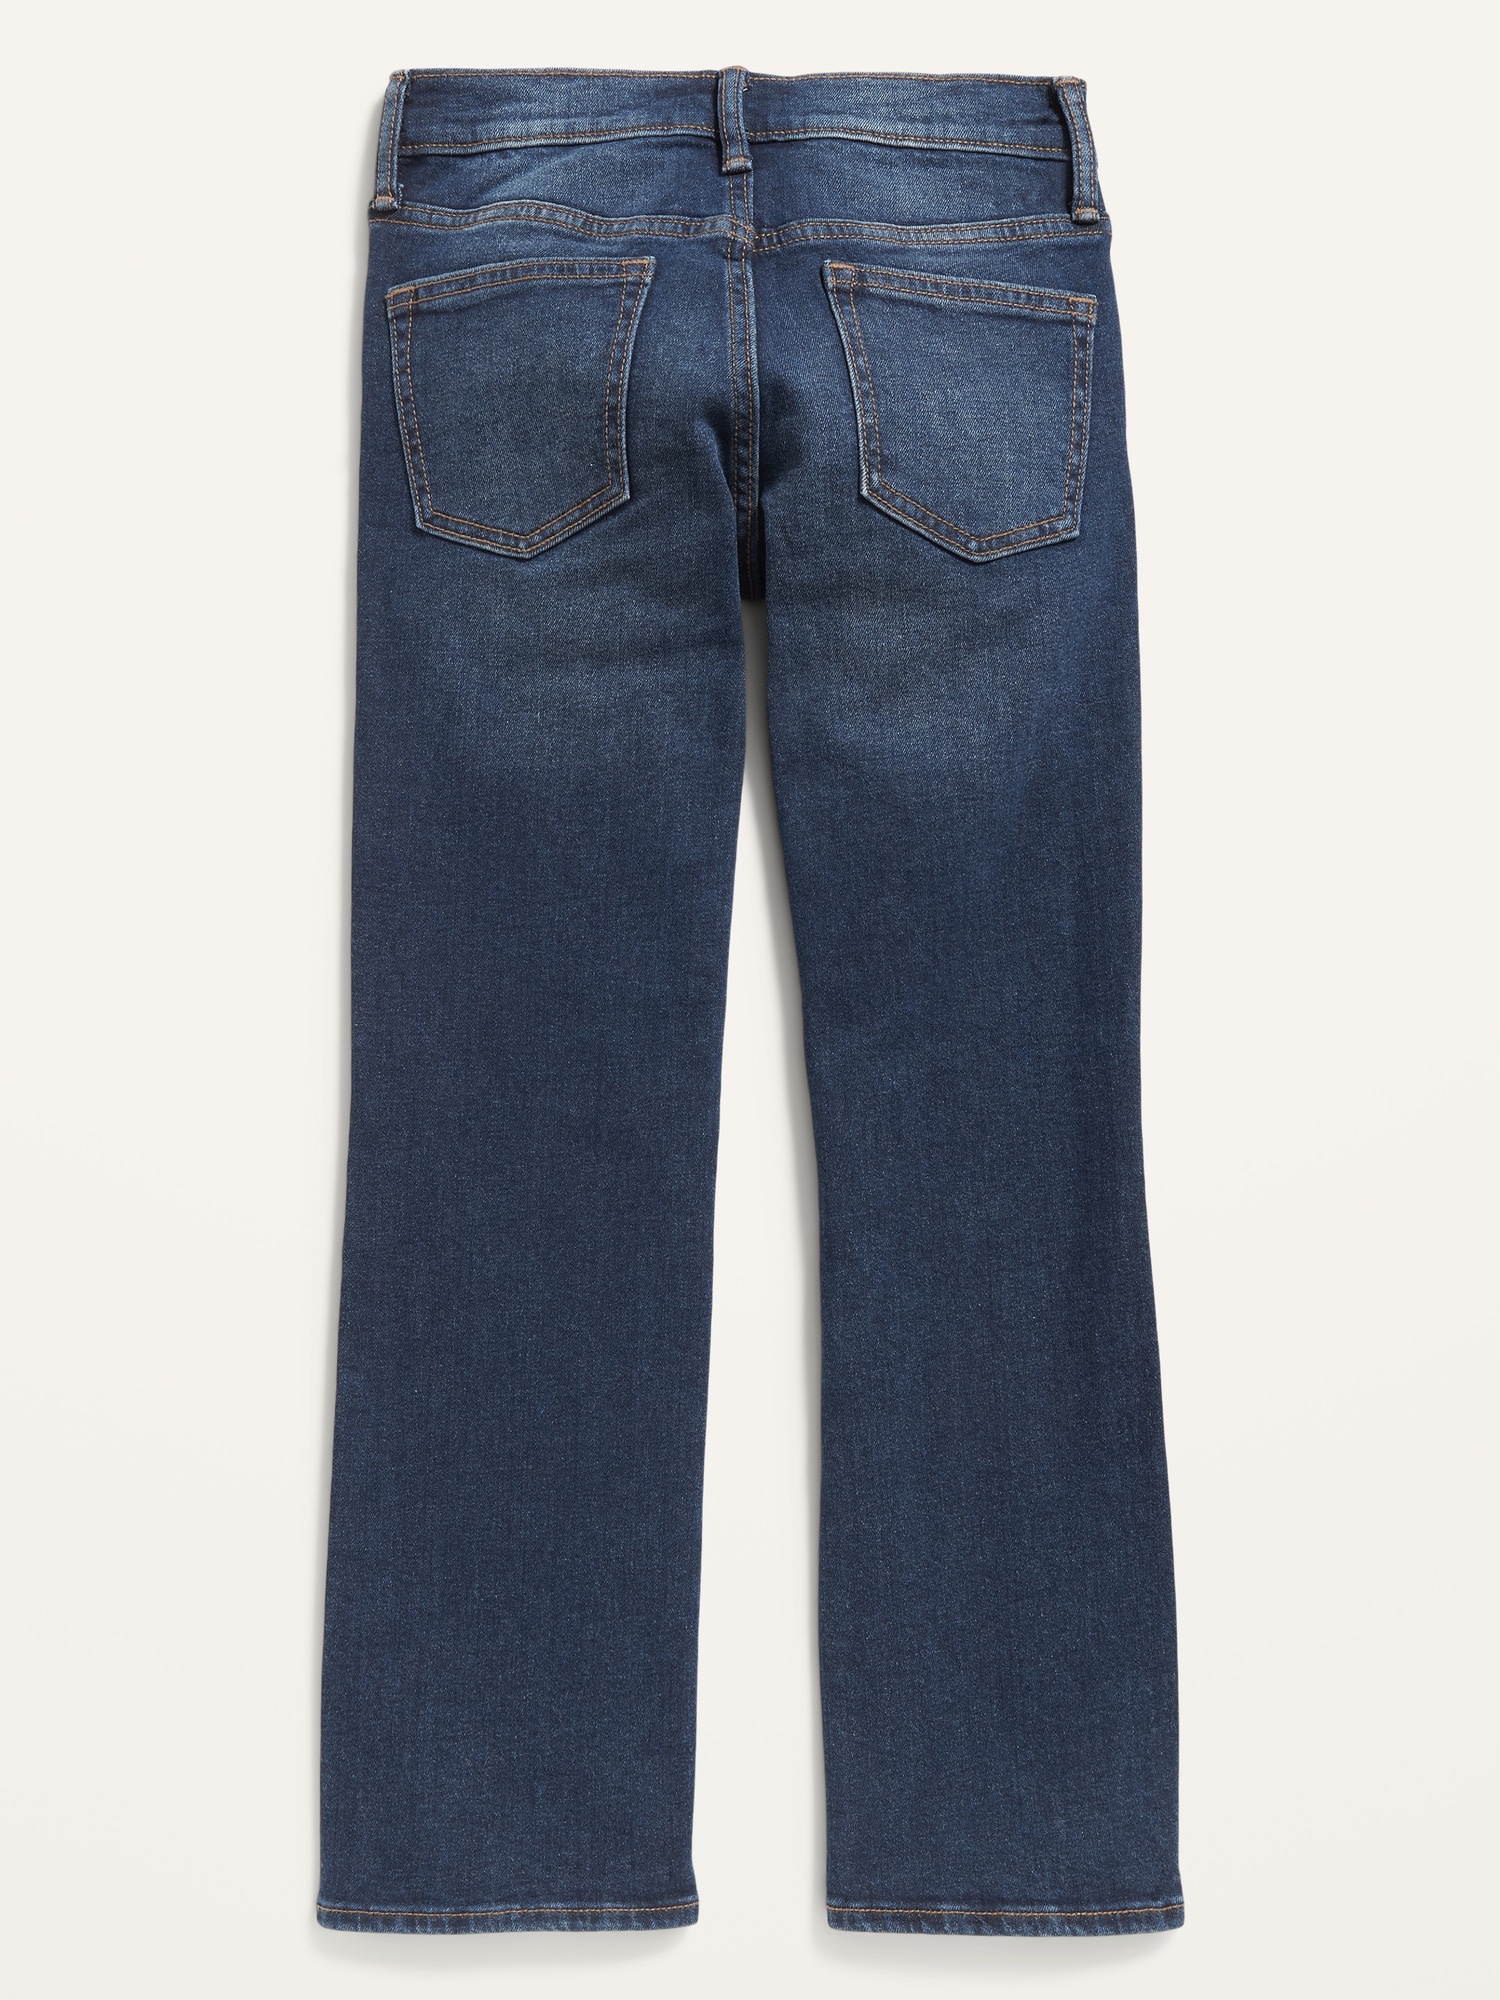 Boot-Cut Built-In Flex Jeans for Boys | Old Navy